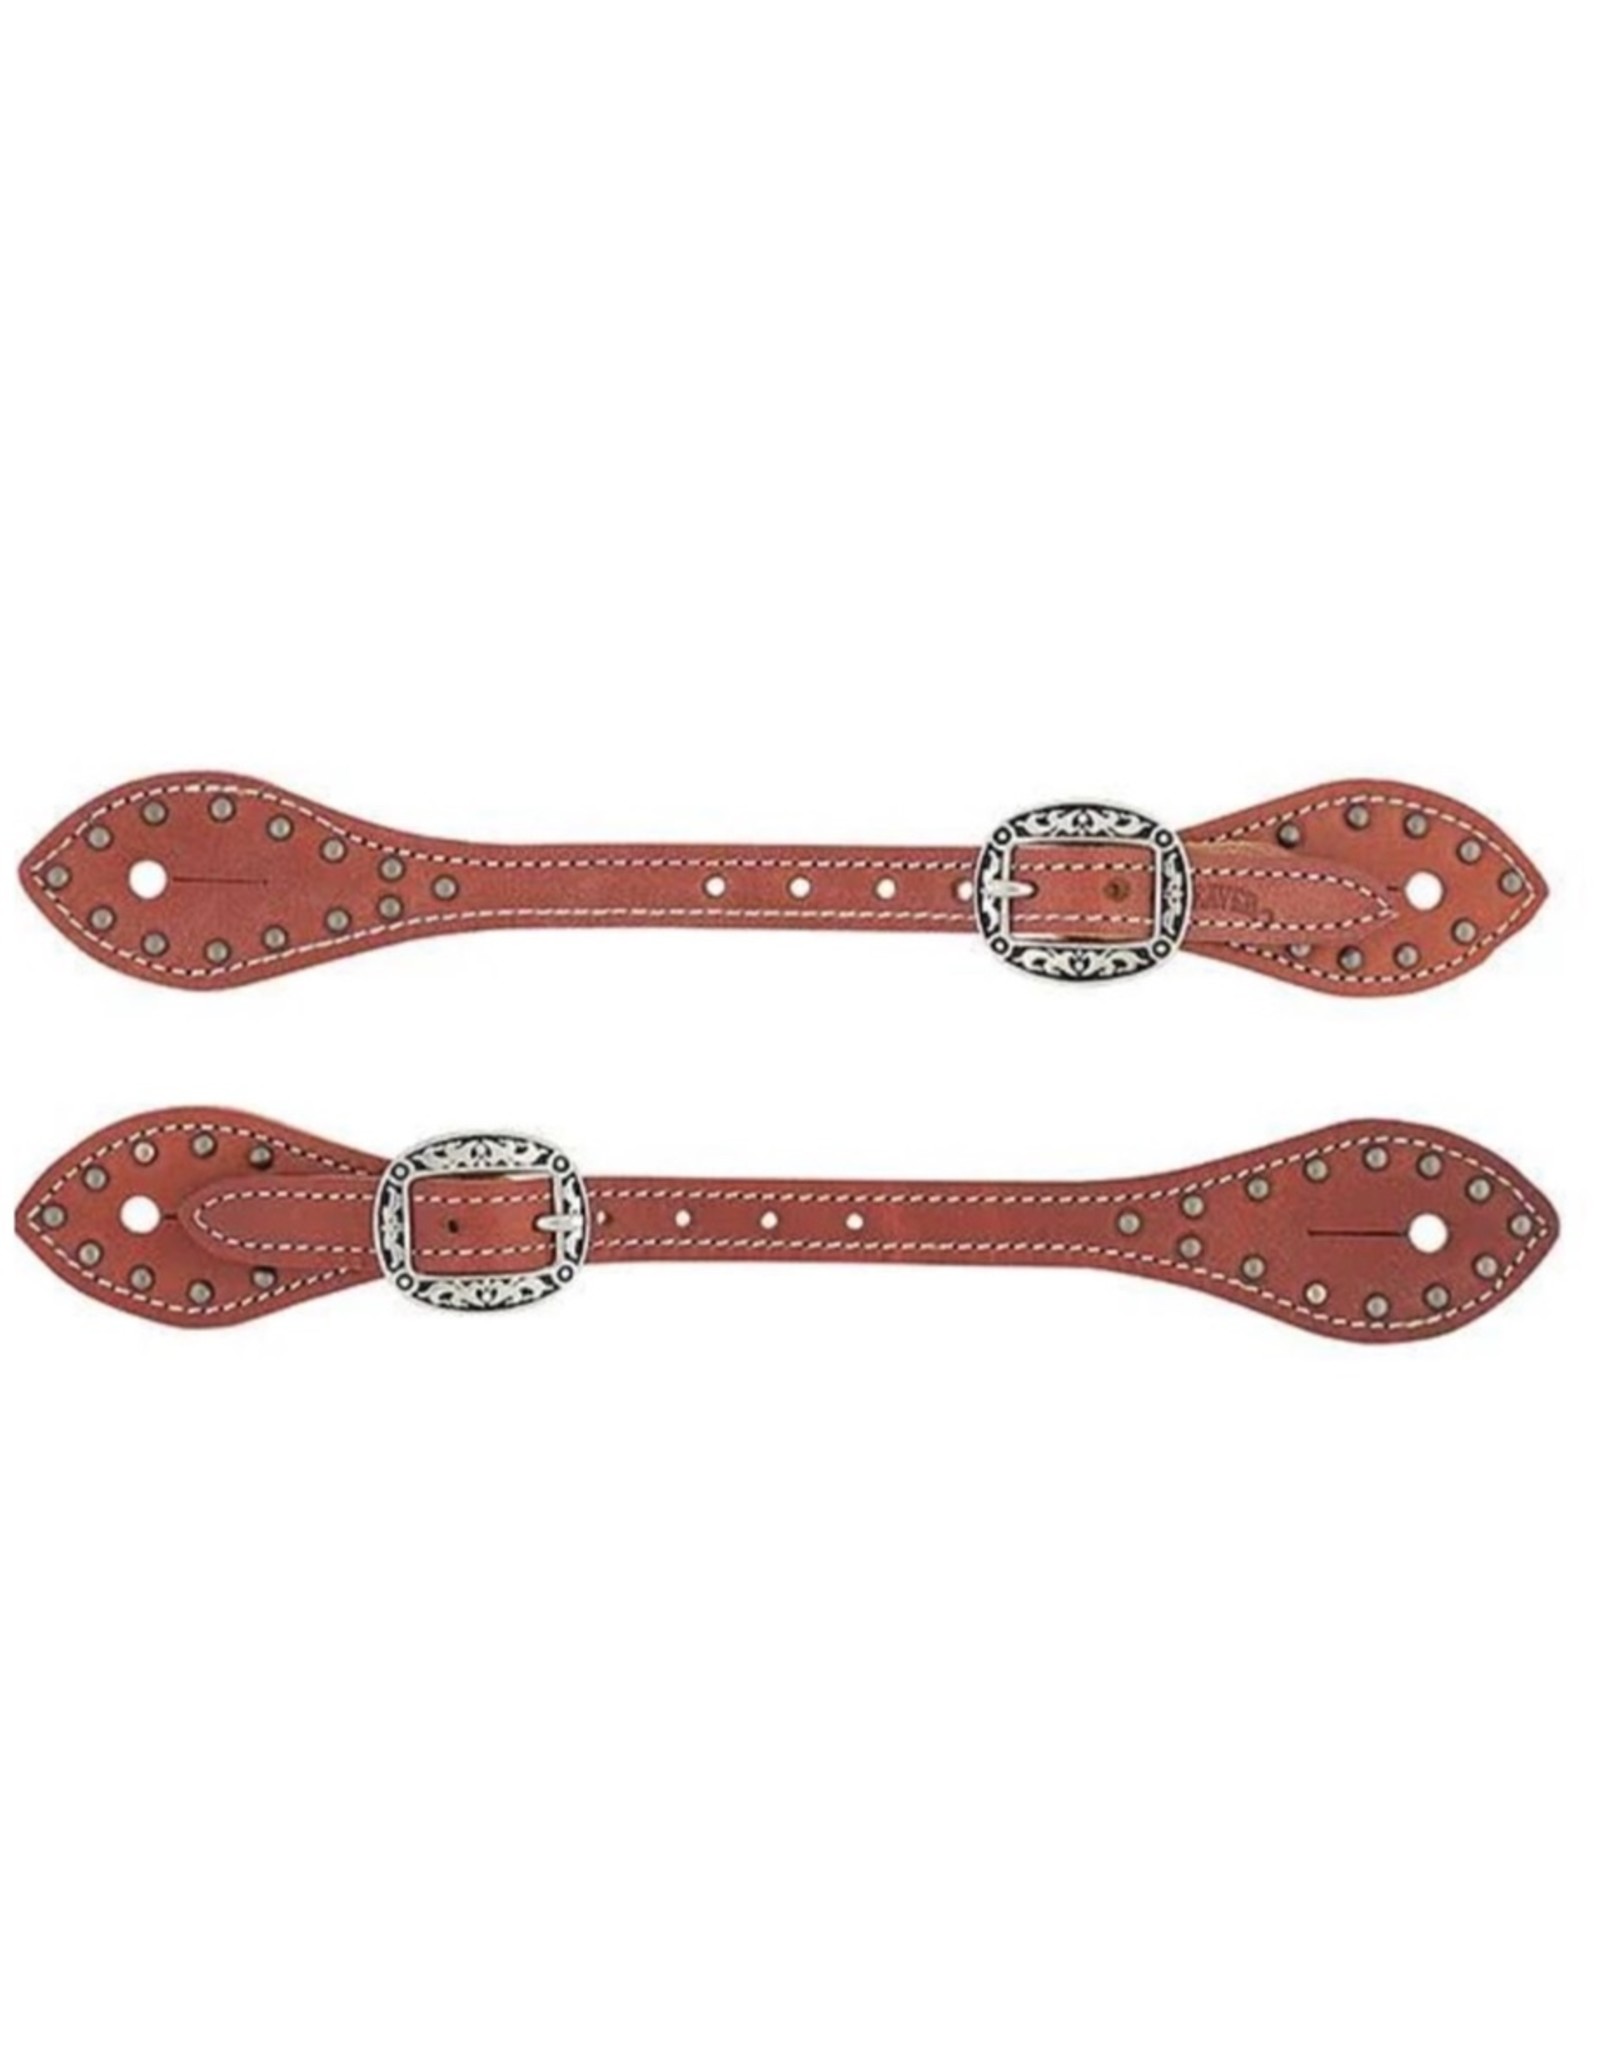 Weaver Mens' Flared Buttered Harness Leather Spur Straps